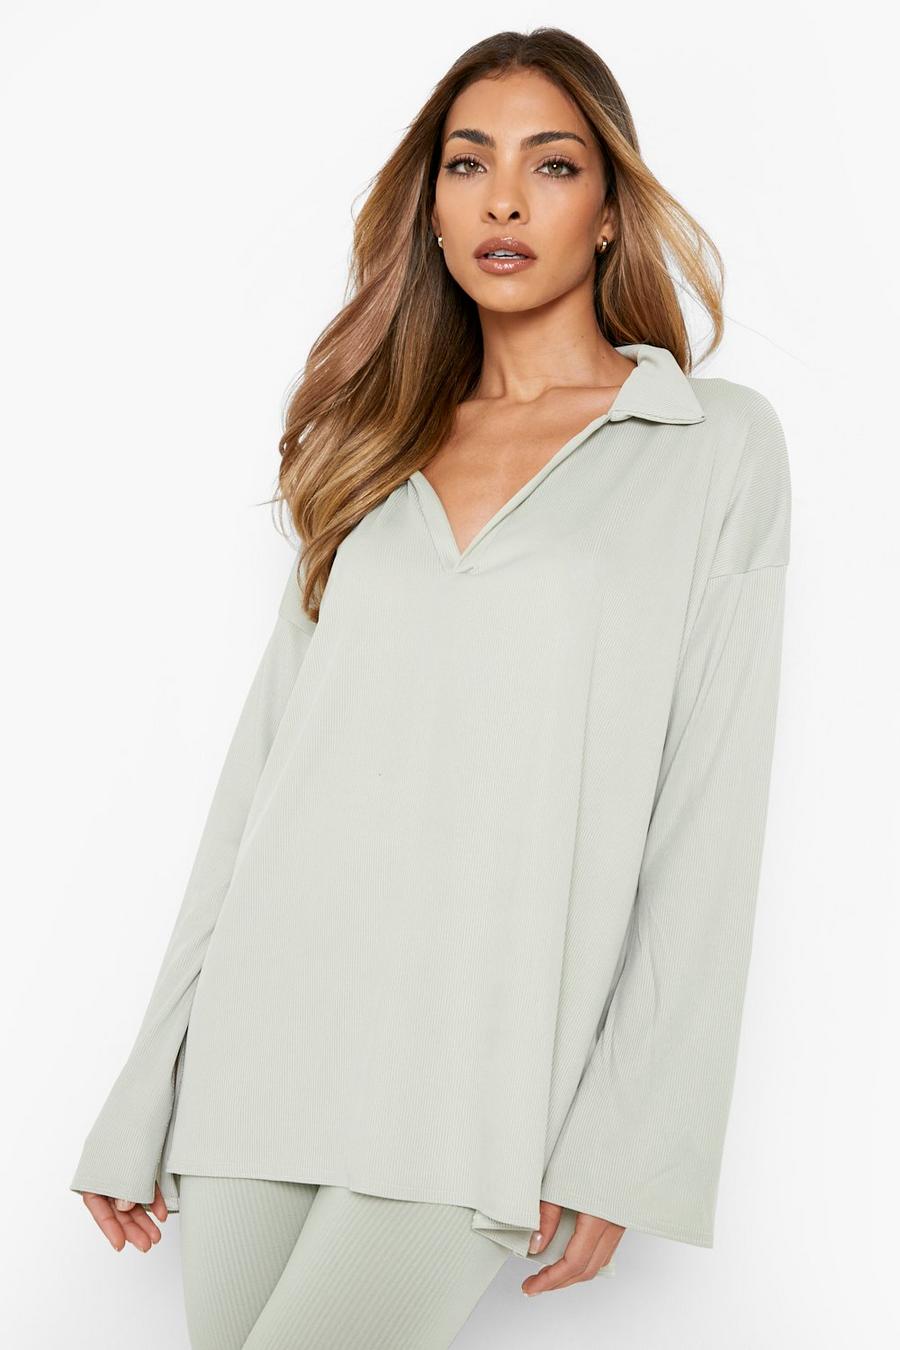 Sage green Collared Flare Sleeve Loose Fit Top